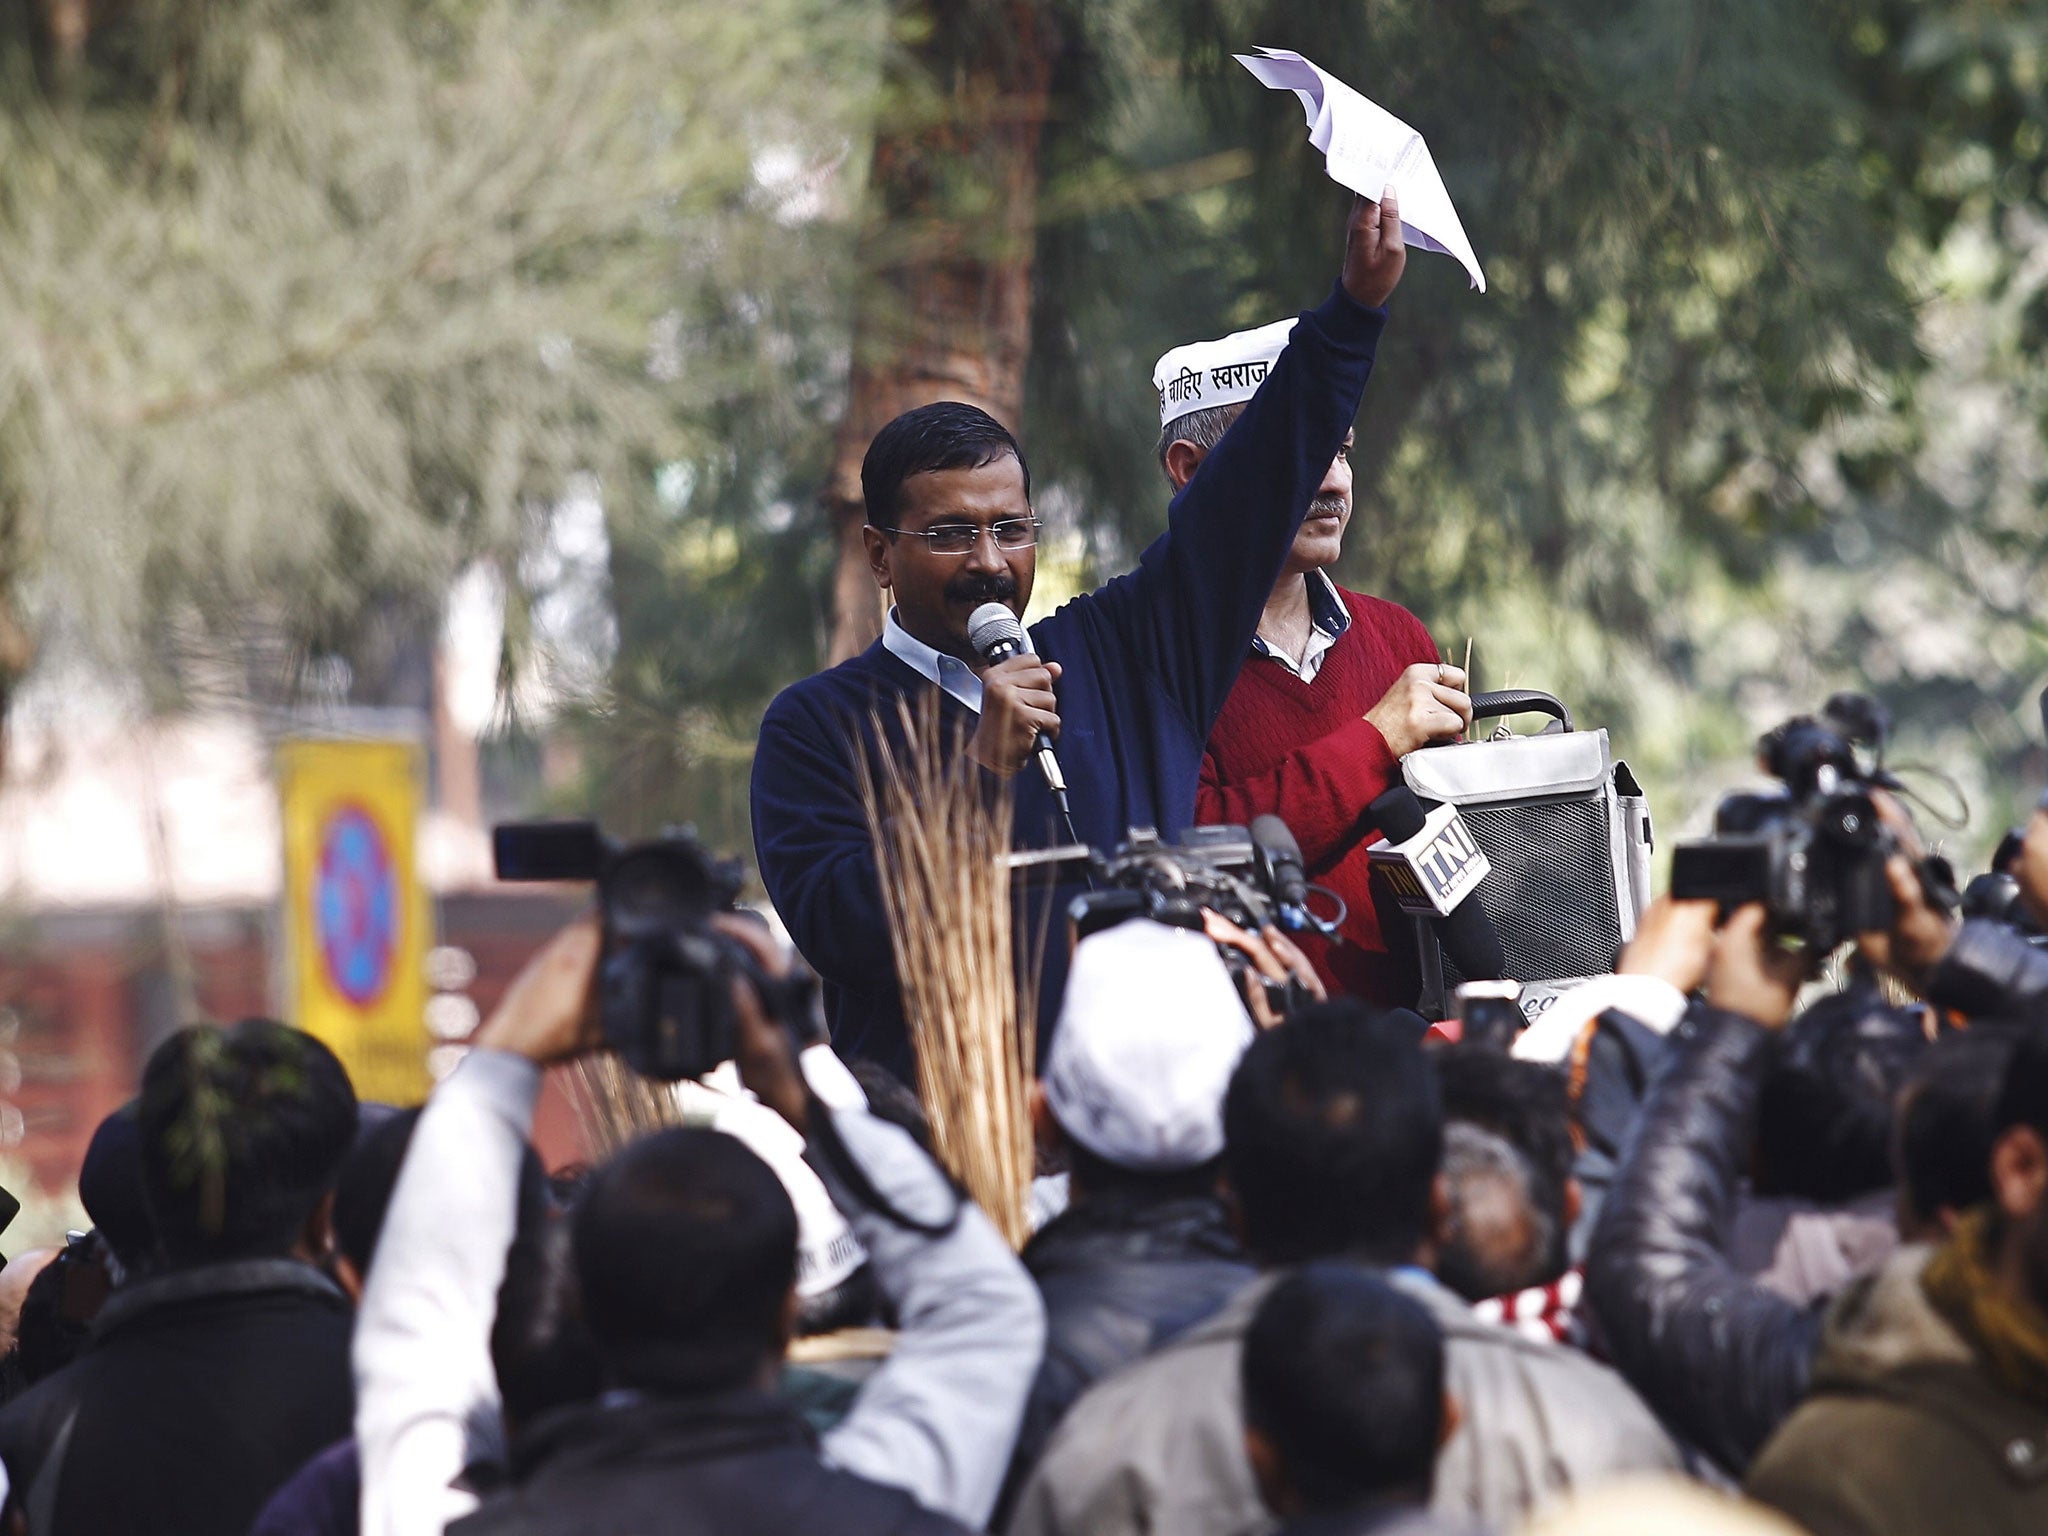 Delhi's Chief Minister Arvind Kejriwal addresses his supporters during a protest in New Delhi